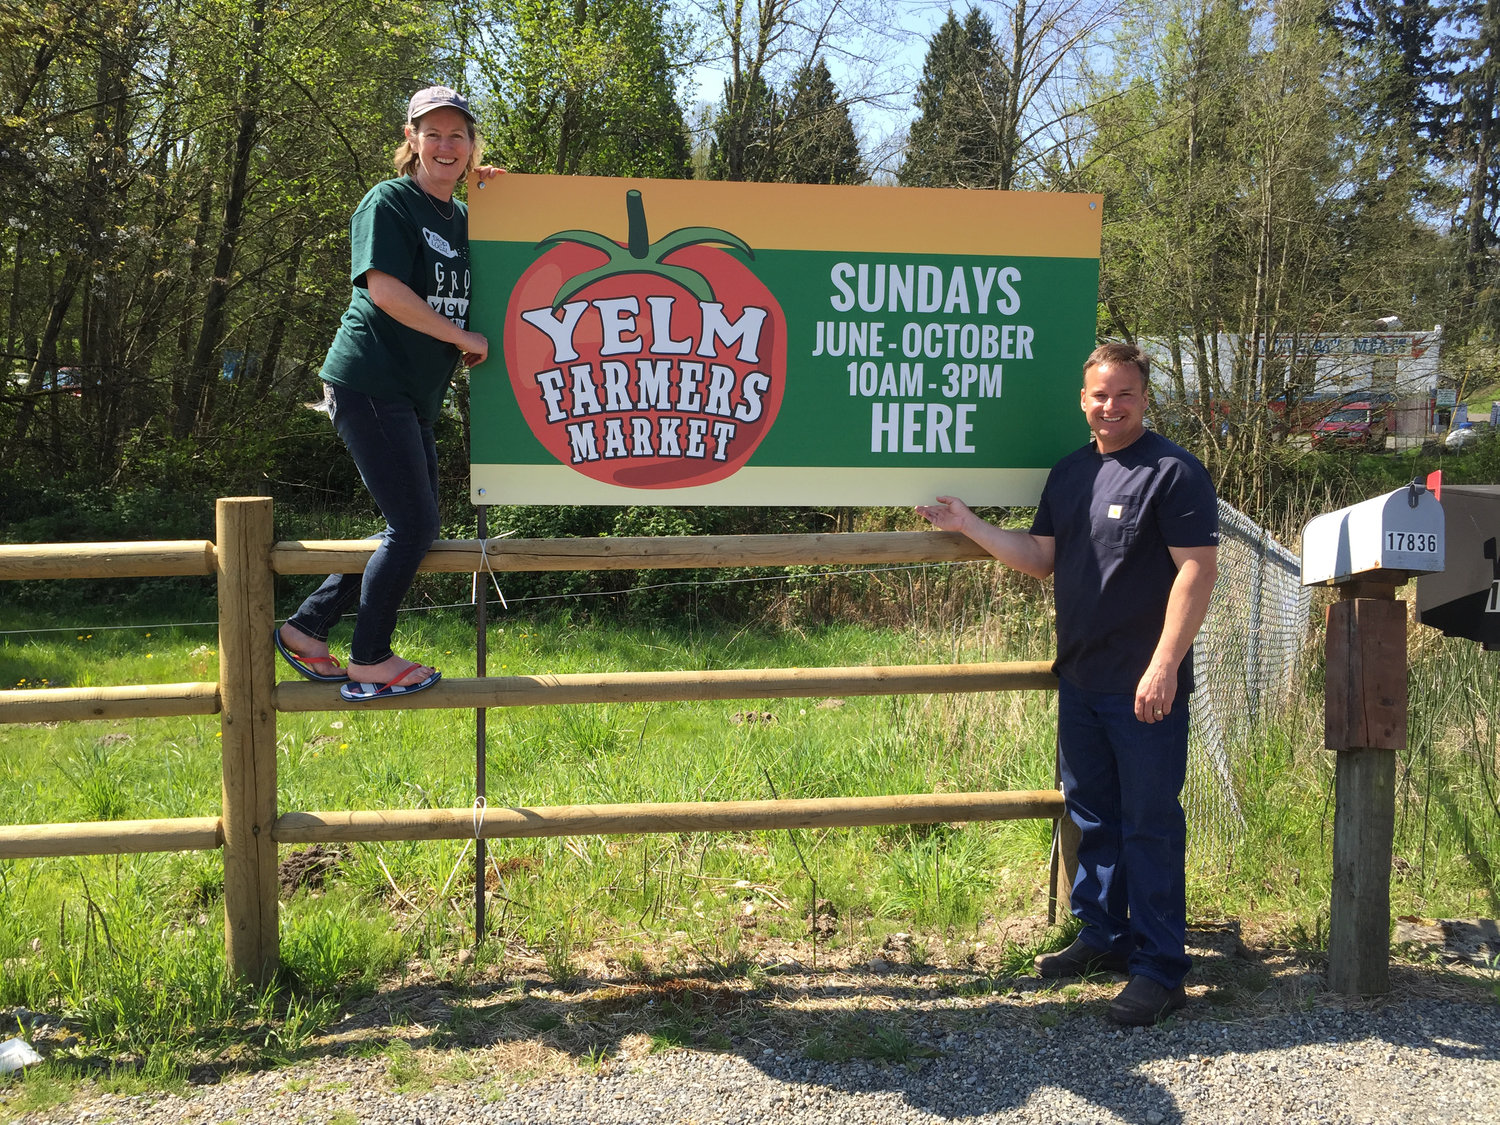 Yelm Farmers Market Manager Karen Rae, left, and Glenn Schorno, right, who owns the property where the market is held, show off a new signs set up in preparation for opening day on Sunday, May 31.